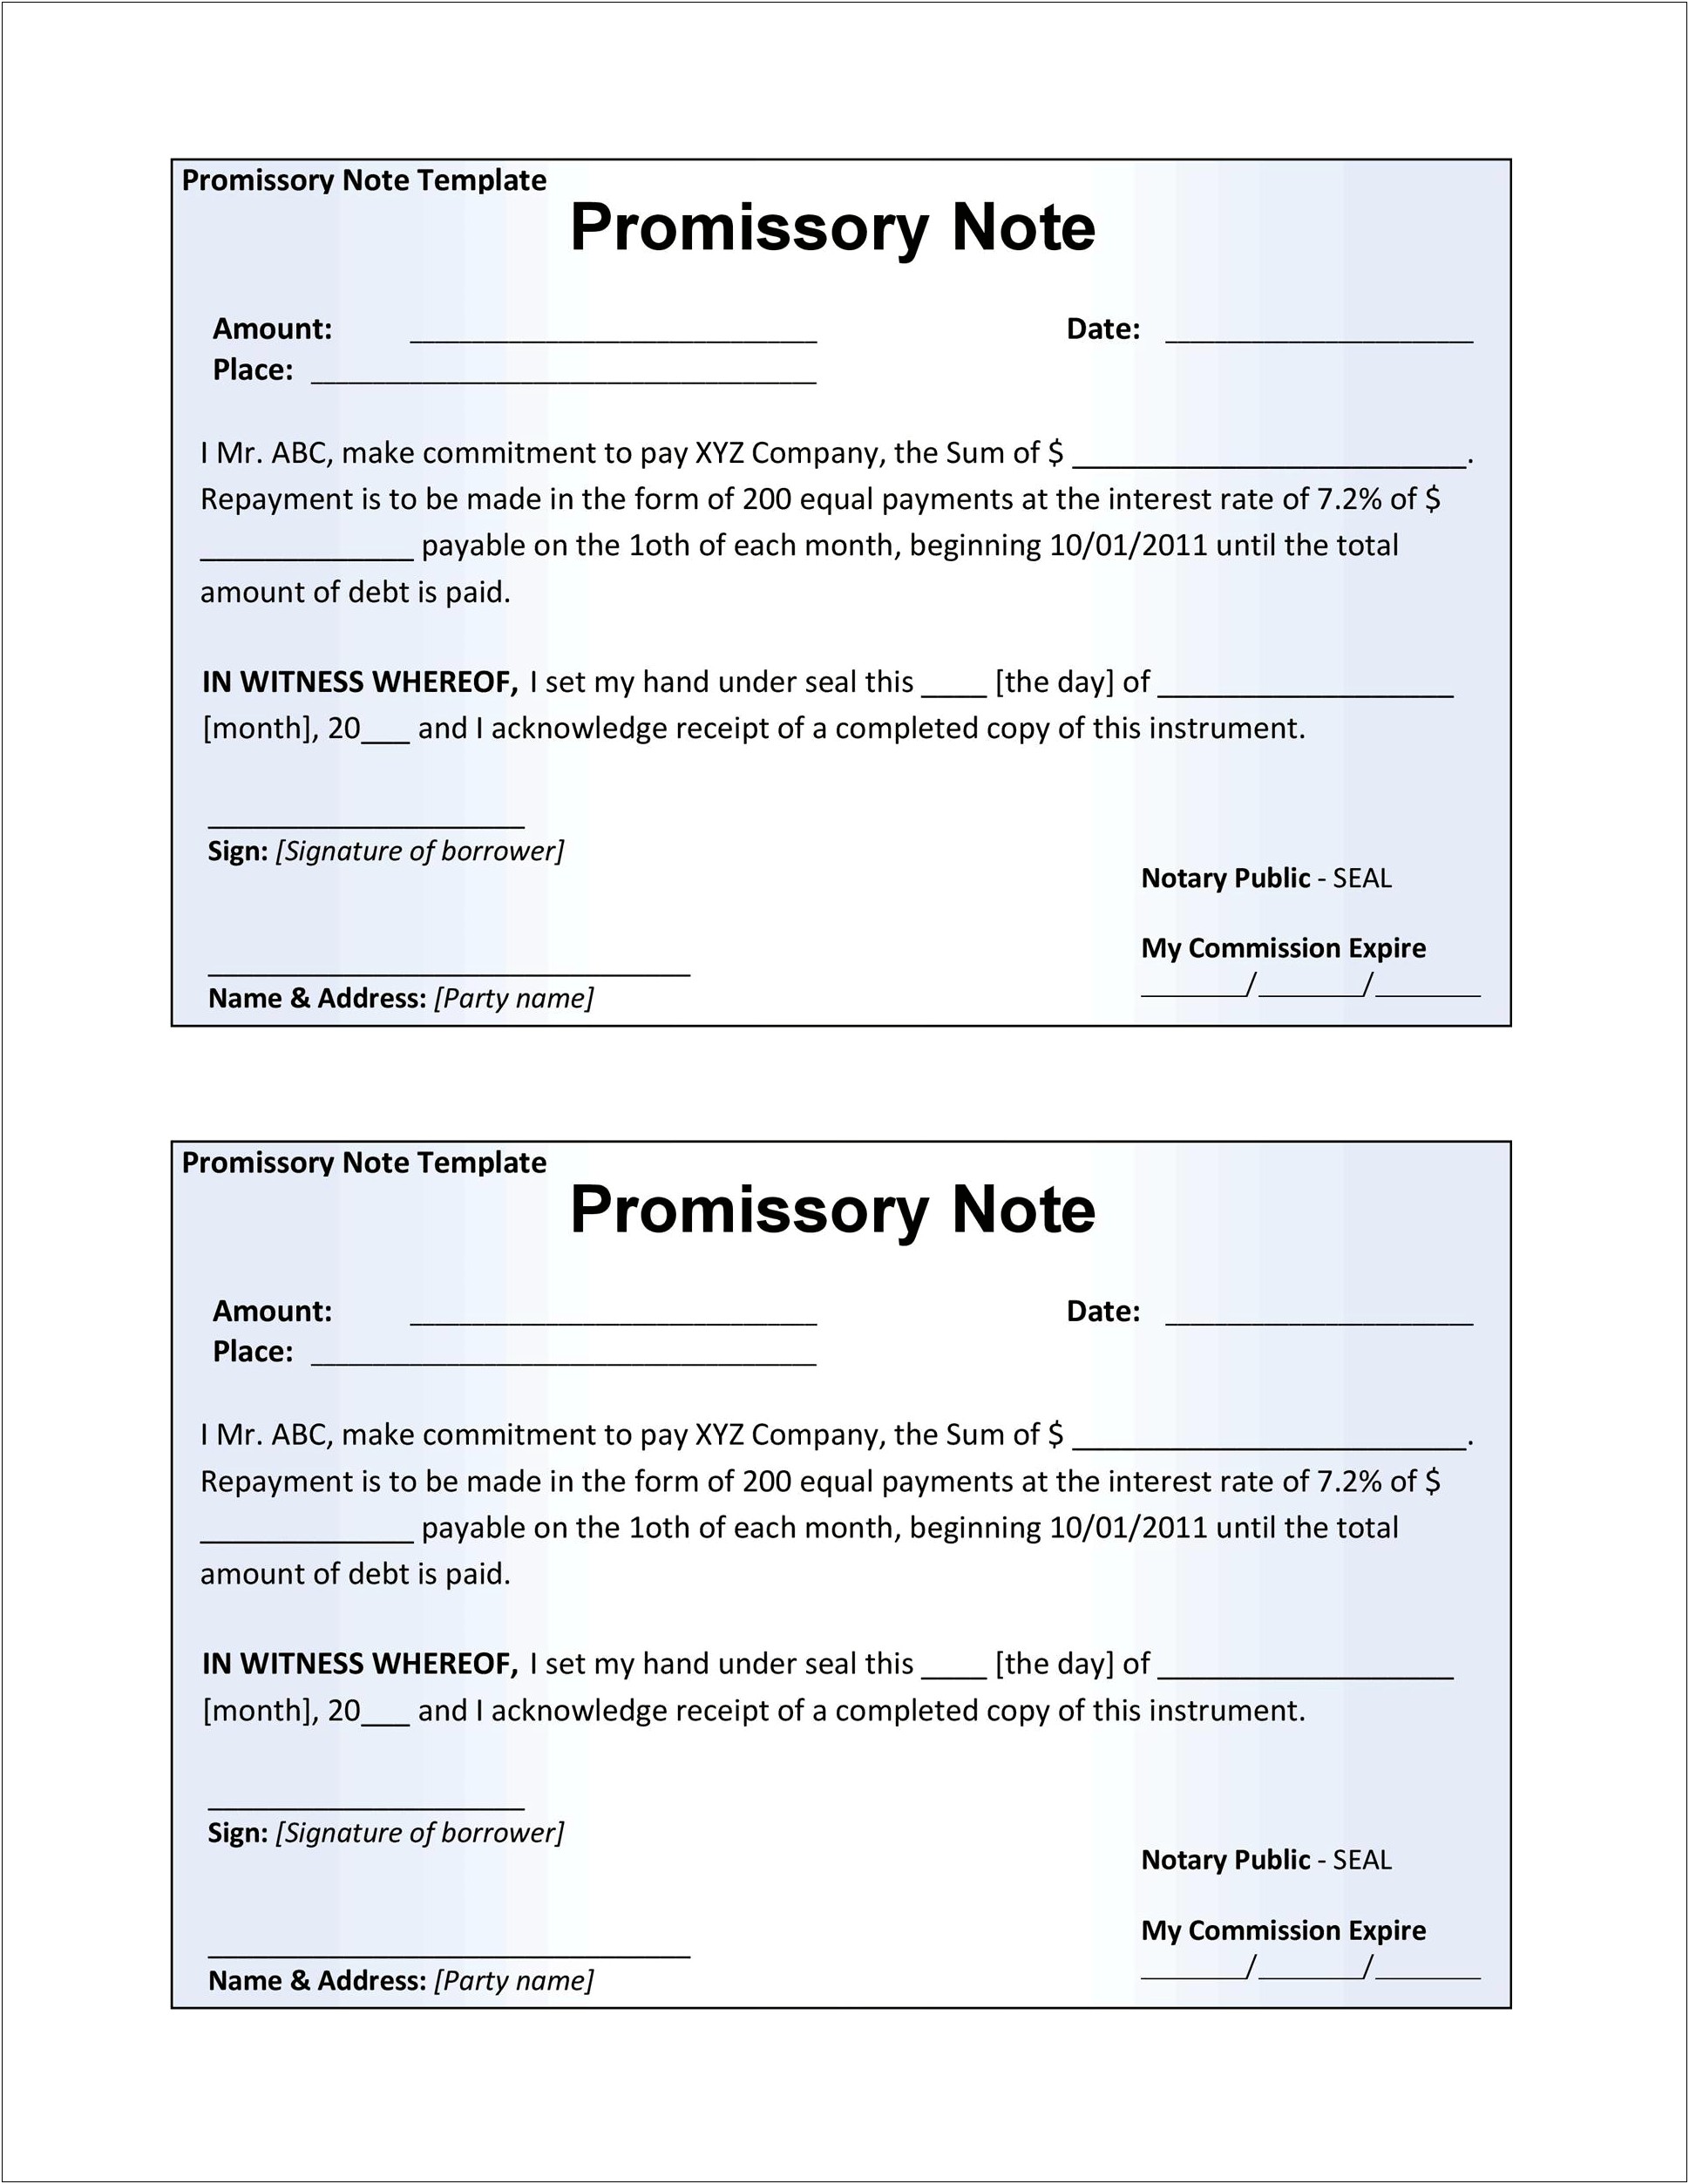 free-promissory-note-template-ontario-canada-resume-example-gallery